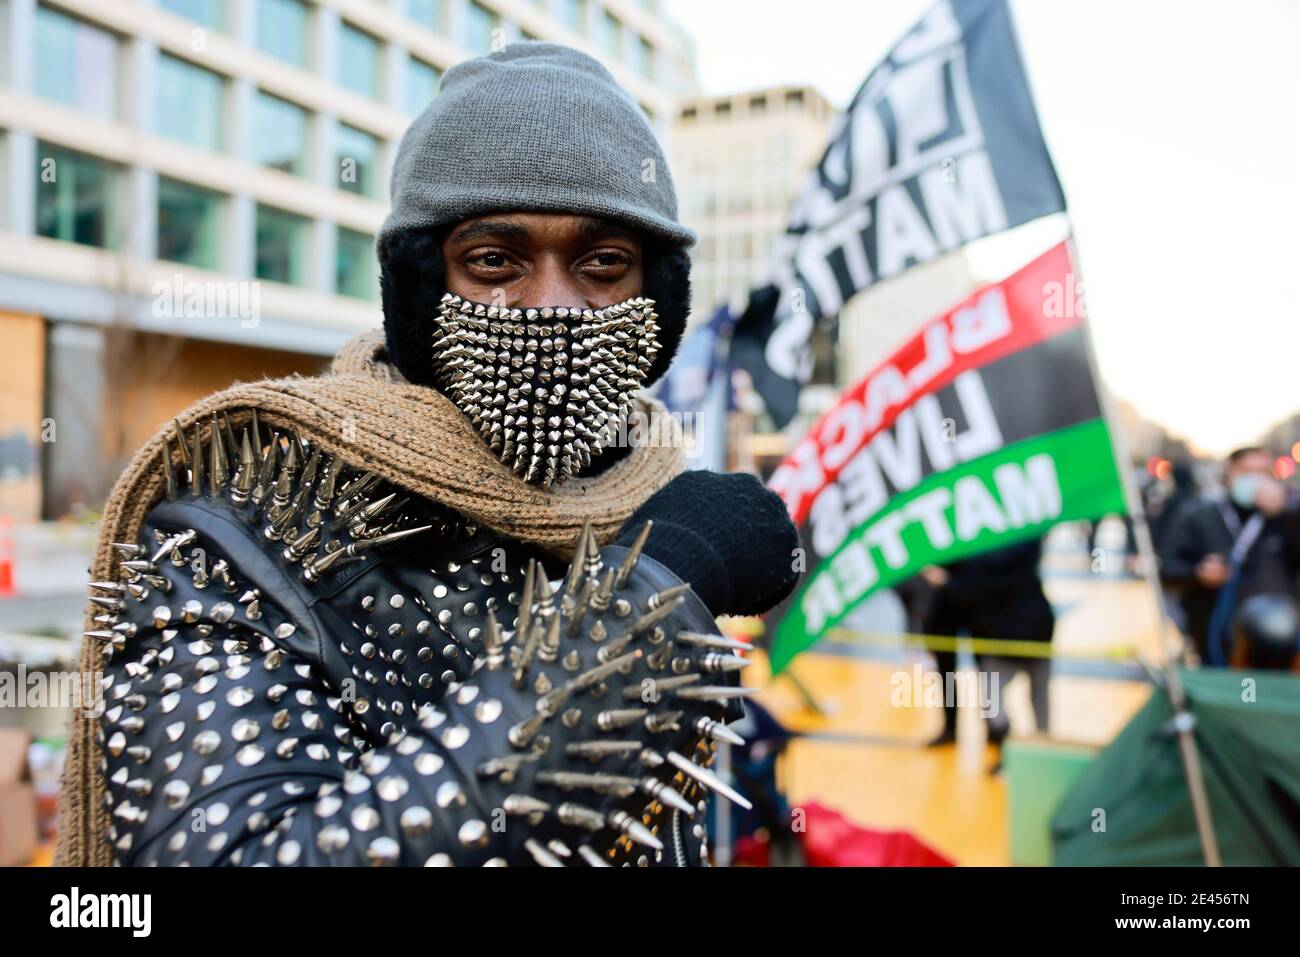 Washington, Columbia, USA. 20th Jan, 2020. Smokey Sims celebrates at Black Lives Matter Plaza after the departure of Donald J. Trump's helicopter at the white house on the inauguration day President Joe Biden and Vice President Kamala Harris. Credit: Jeremy Hogan/SOPA Images/ZUMA Wire/Alamy Live News Stock Photo